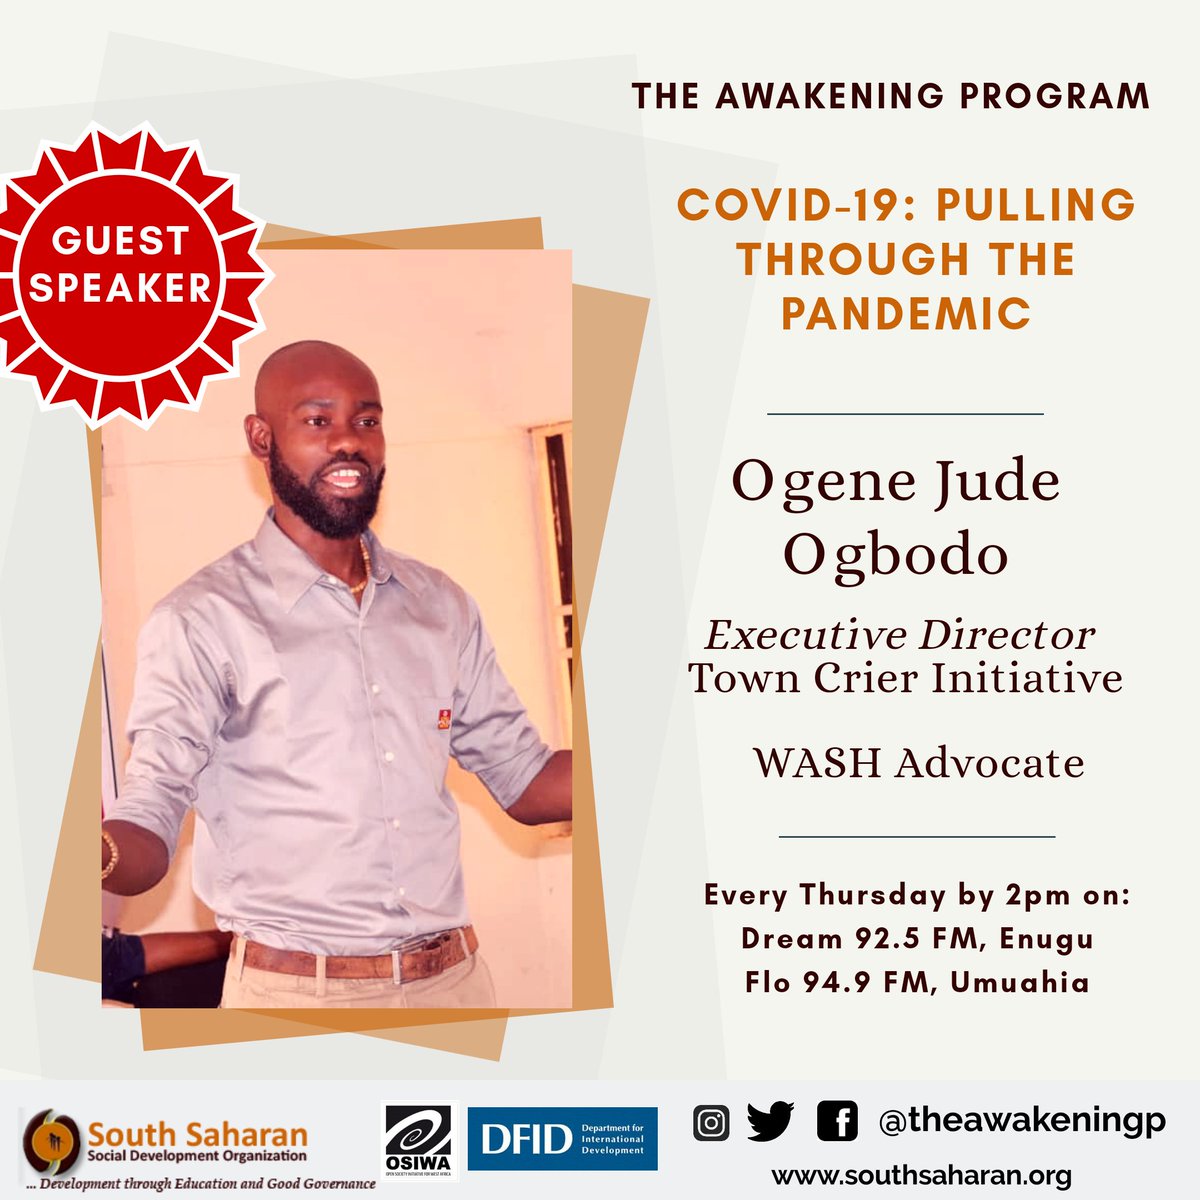 Our guest speaker for today's broadcast is Ogene Jude Ogbodo ( @ogene_ogbodo), Executive Director of Town Crier Initiative ( @InitiativeTown) and WASH advocate